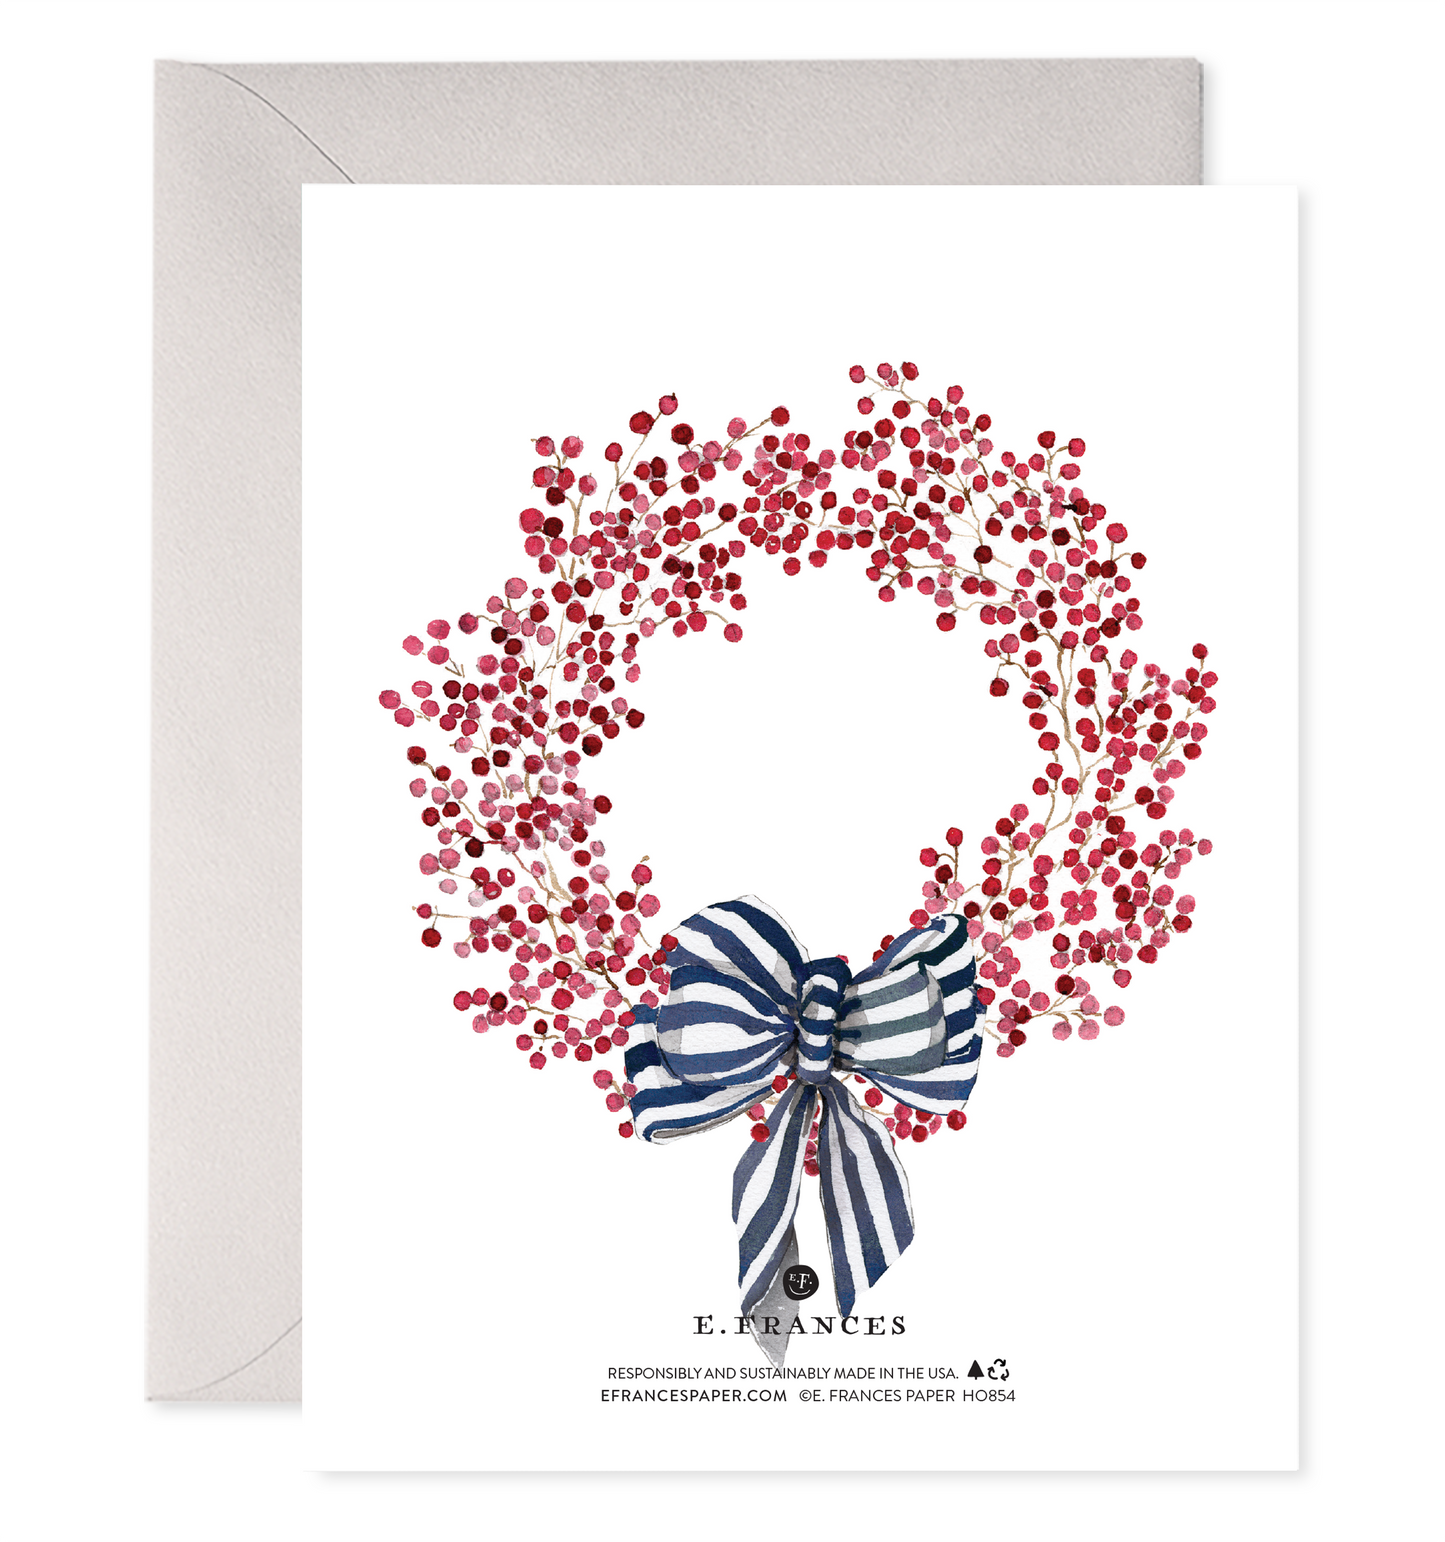 Red Berry Wreath | Joy Christmas Cards (Boxed Set of 6): 4.25 X 5.5 INCHES